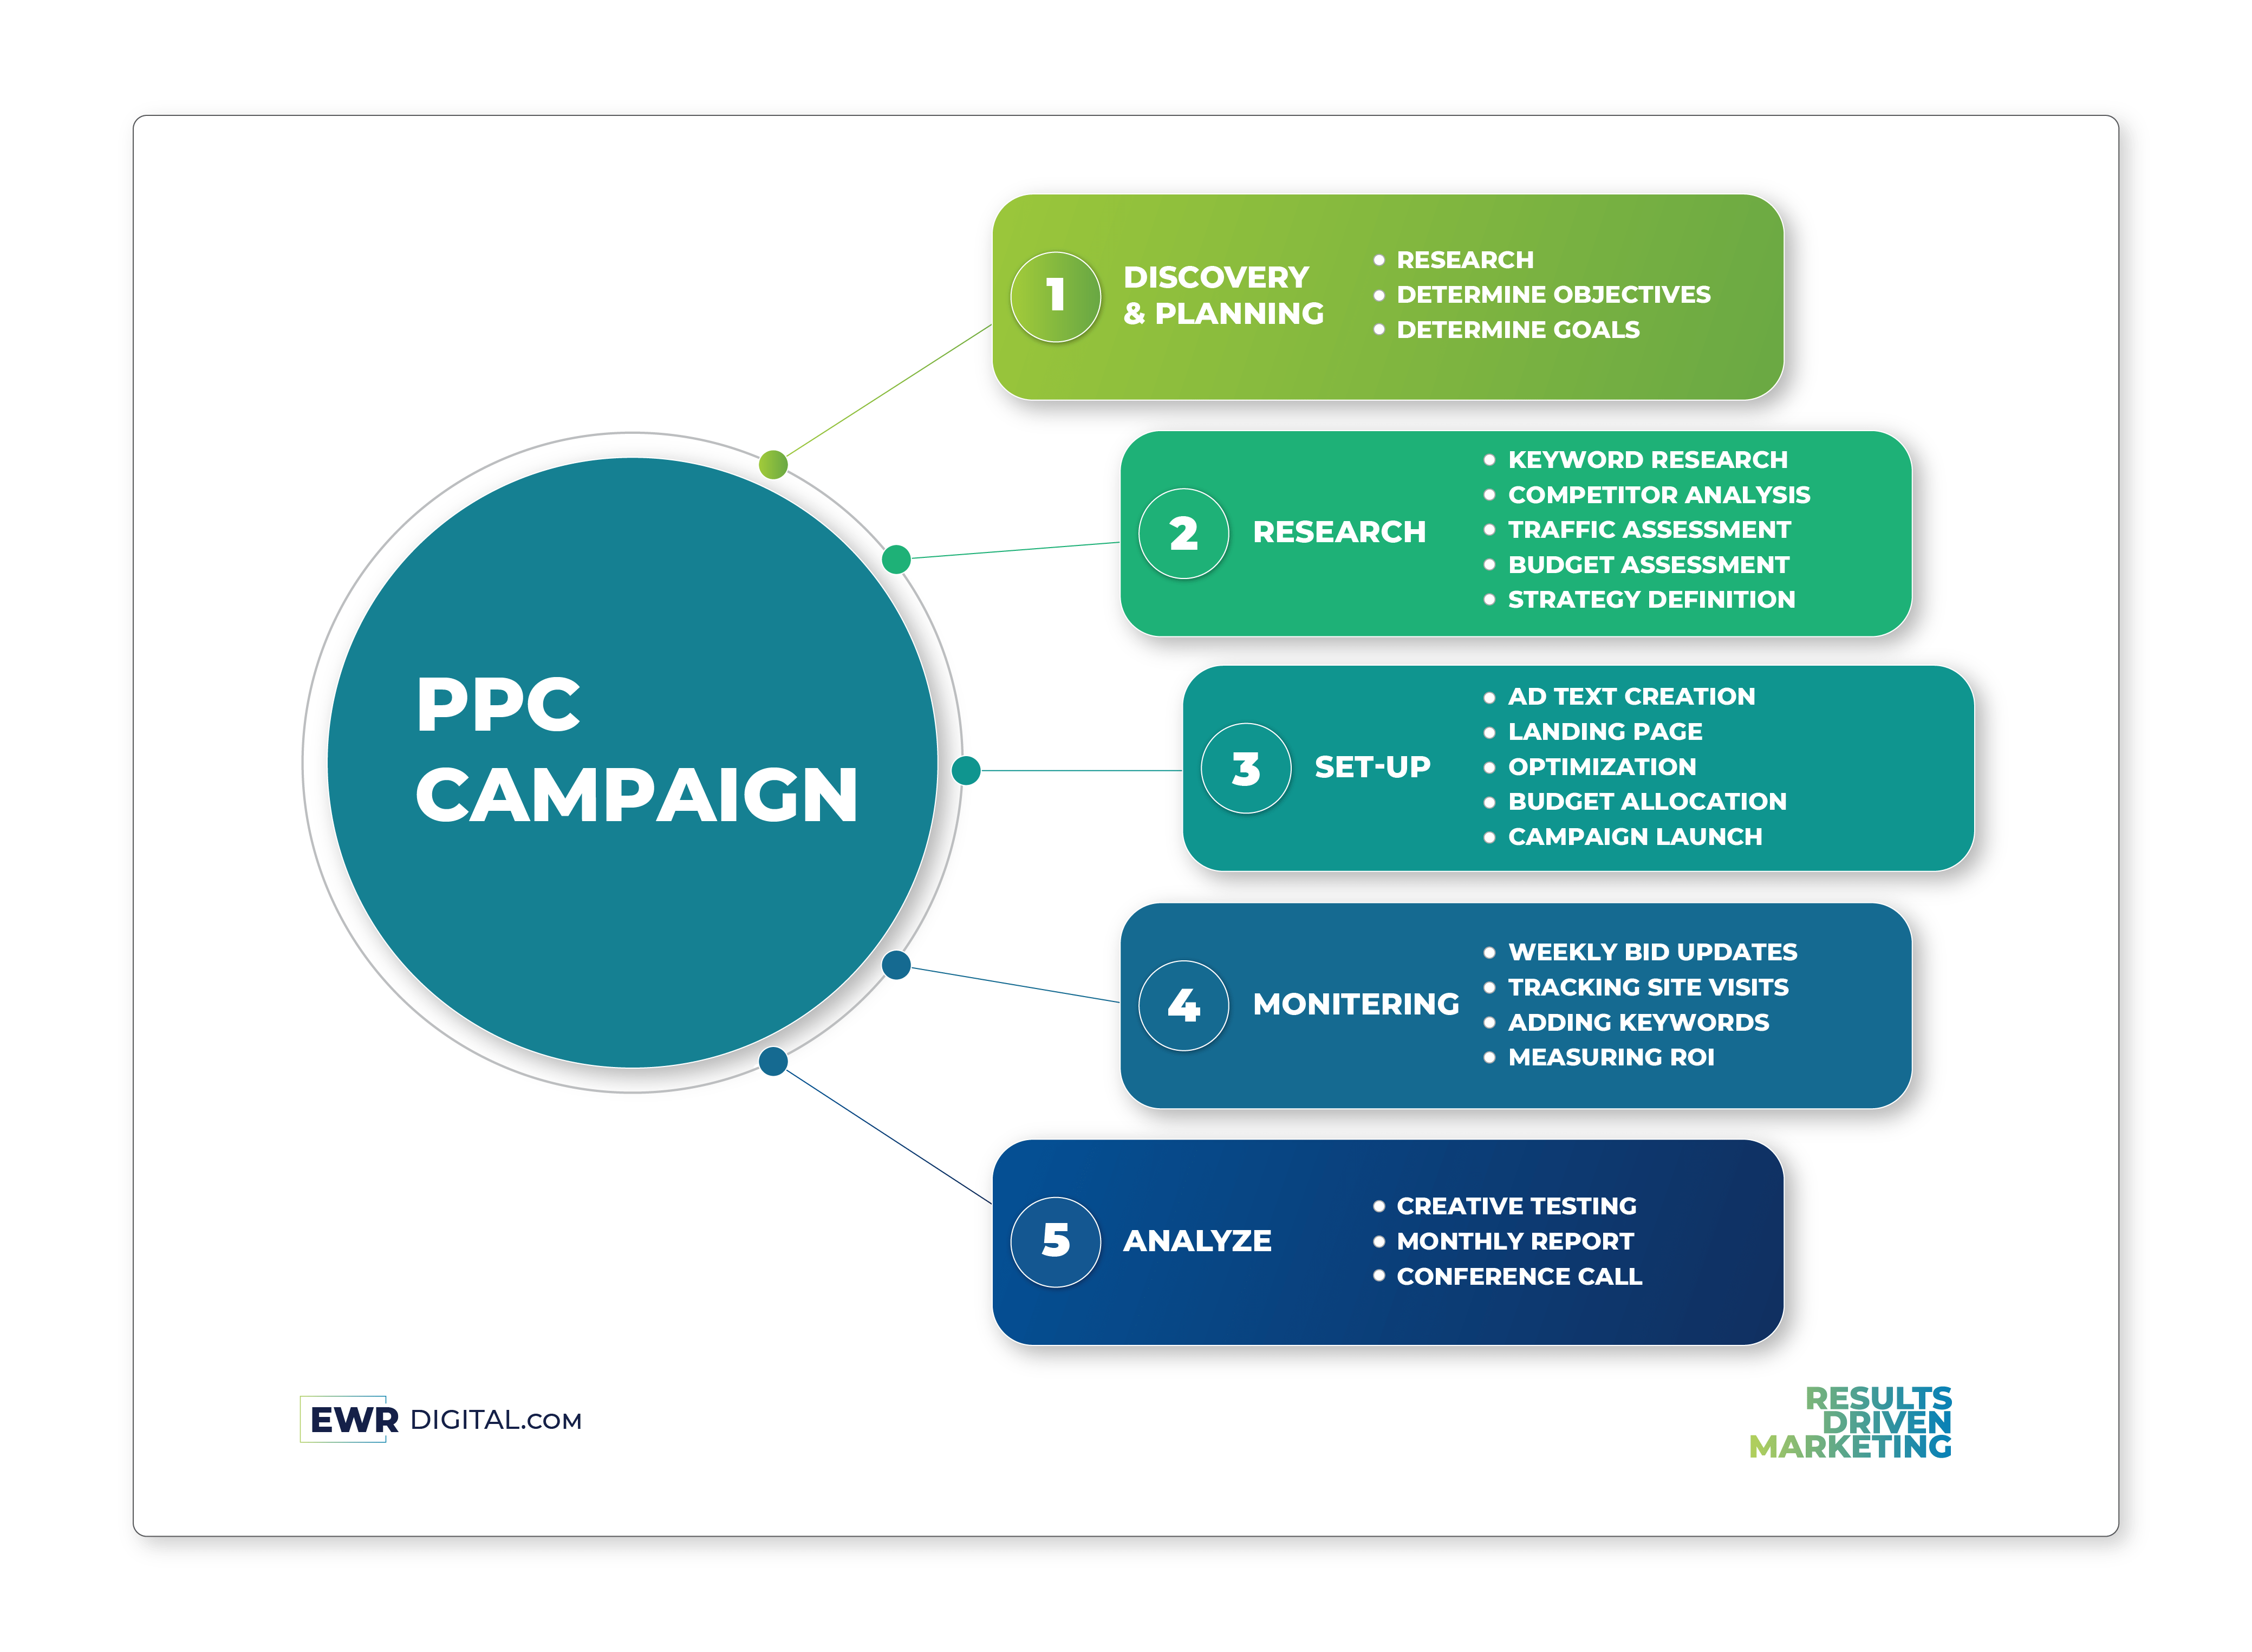 PPC Setup and Campaign Components - An illustrative image showcasing the various elements and steps involved in setting up a PPC campaign.